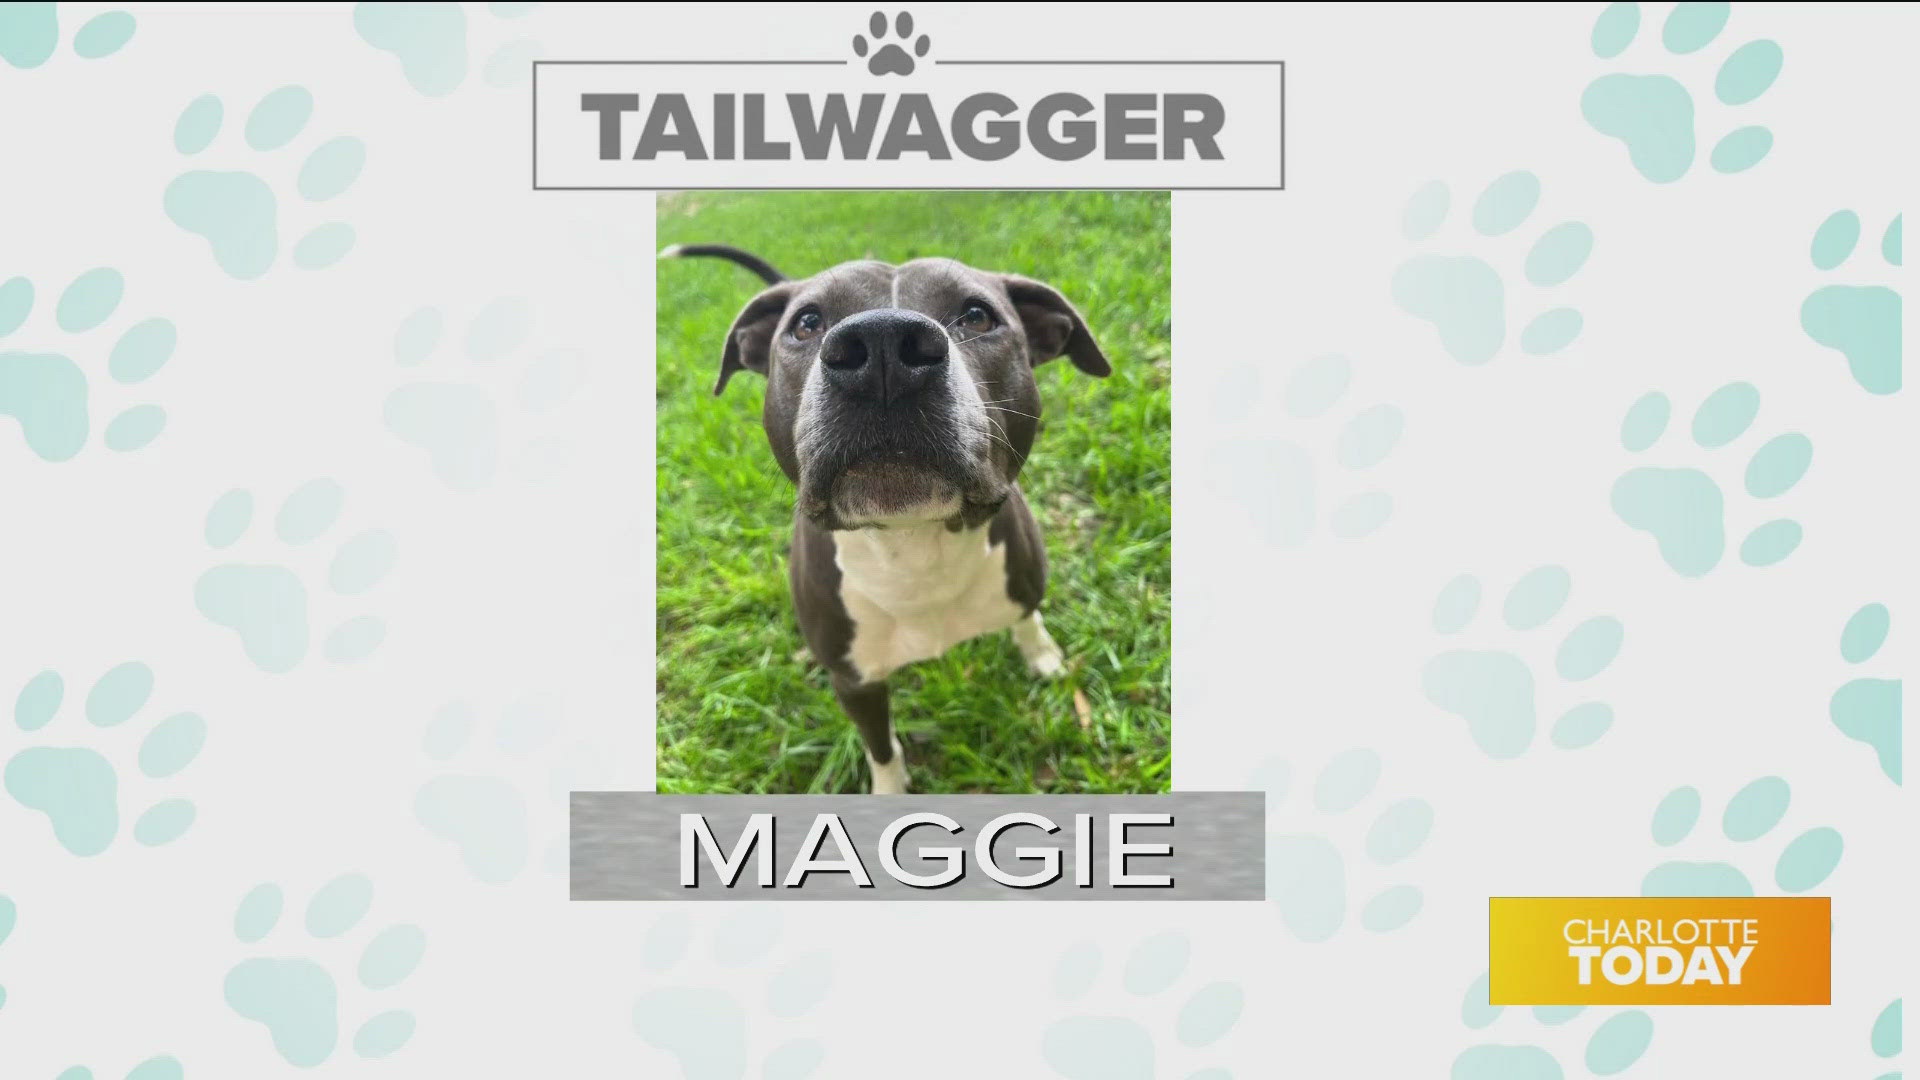 Maggie is available for adoption today from Animal Care & Control